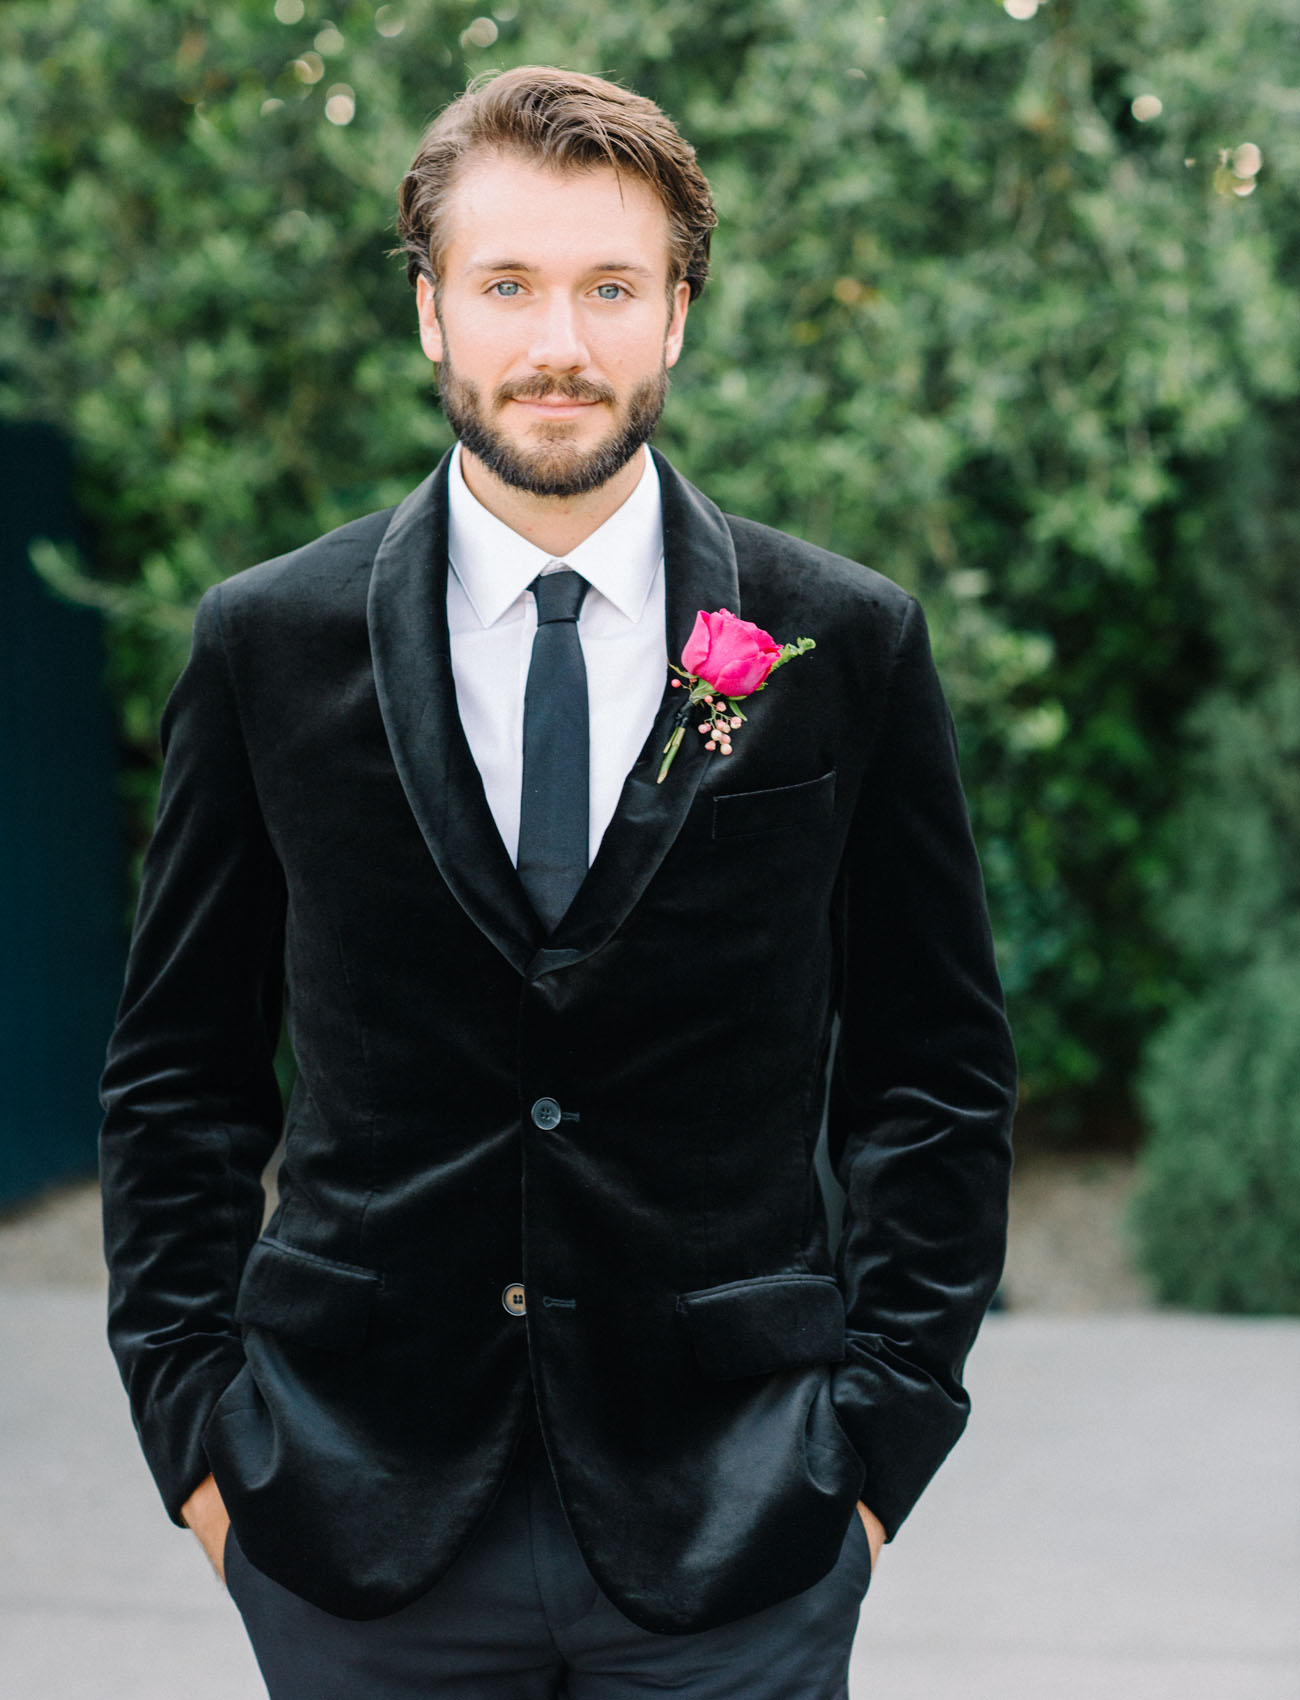 The groom was wearing a velvet jacket, it's a great idea for chilly fall and winter days